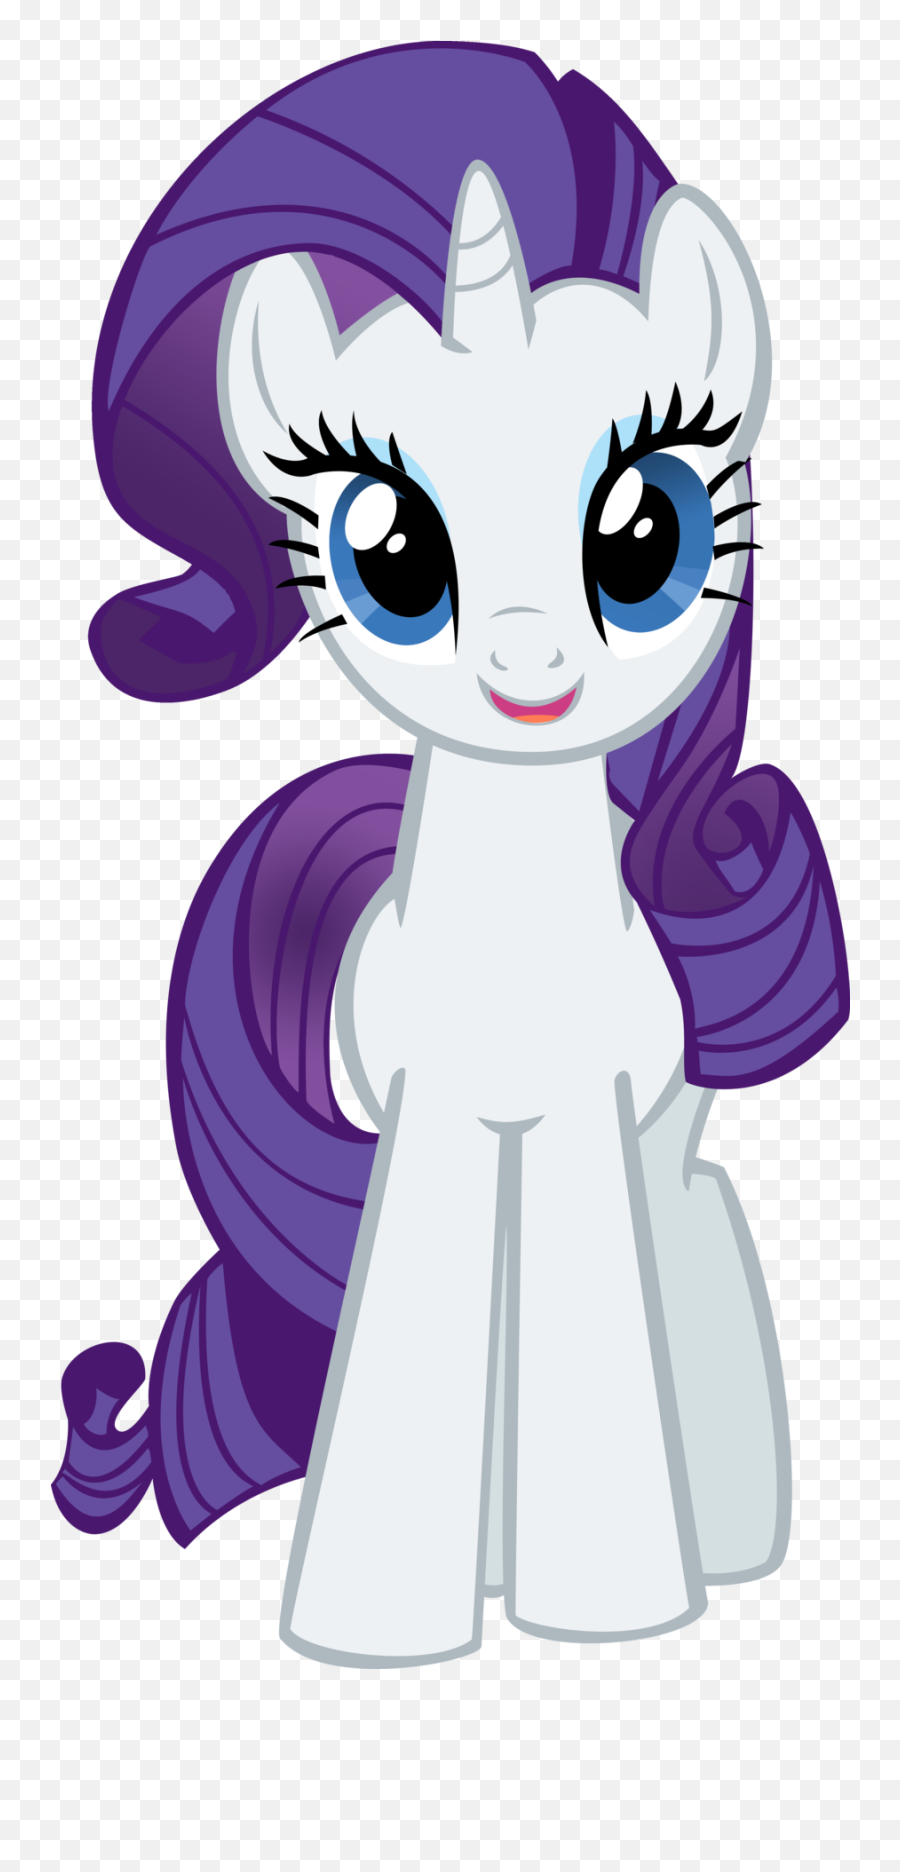 Rarity Png 7 Image - My Little Pony Head,Rarity Png